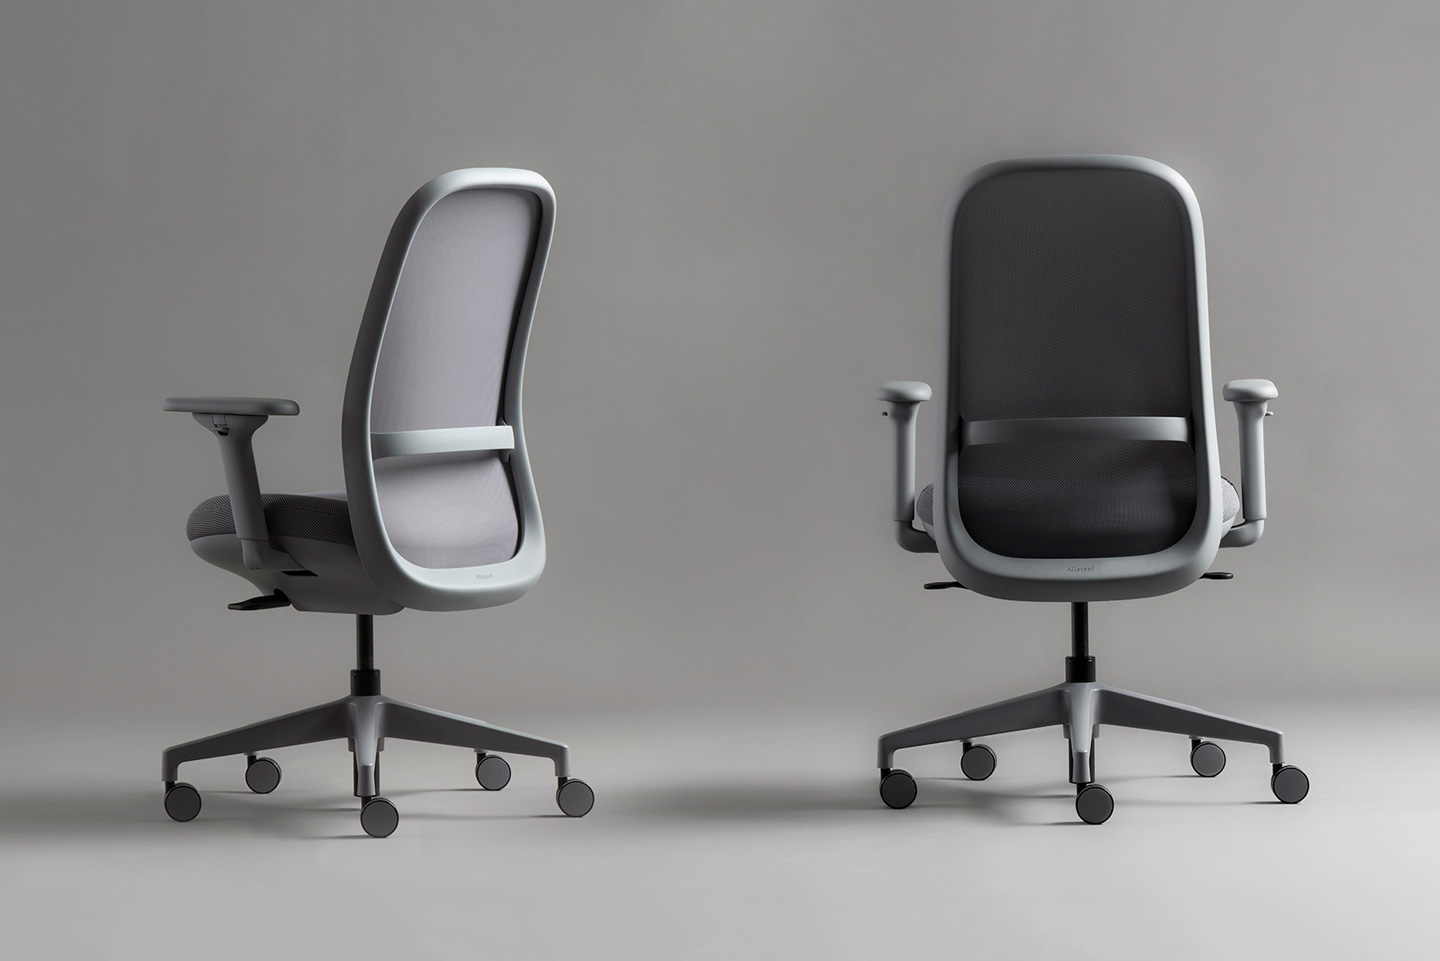 #LAYER Design’s O6 chair is a cozy, minimalist task-chair for your everyday WFH needs